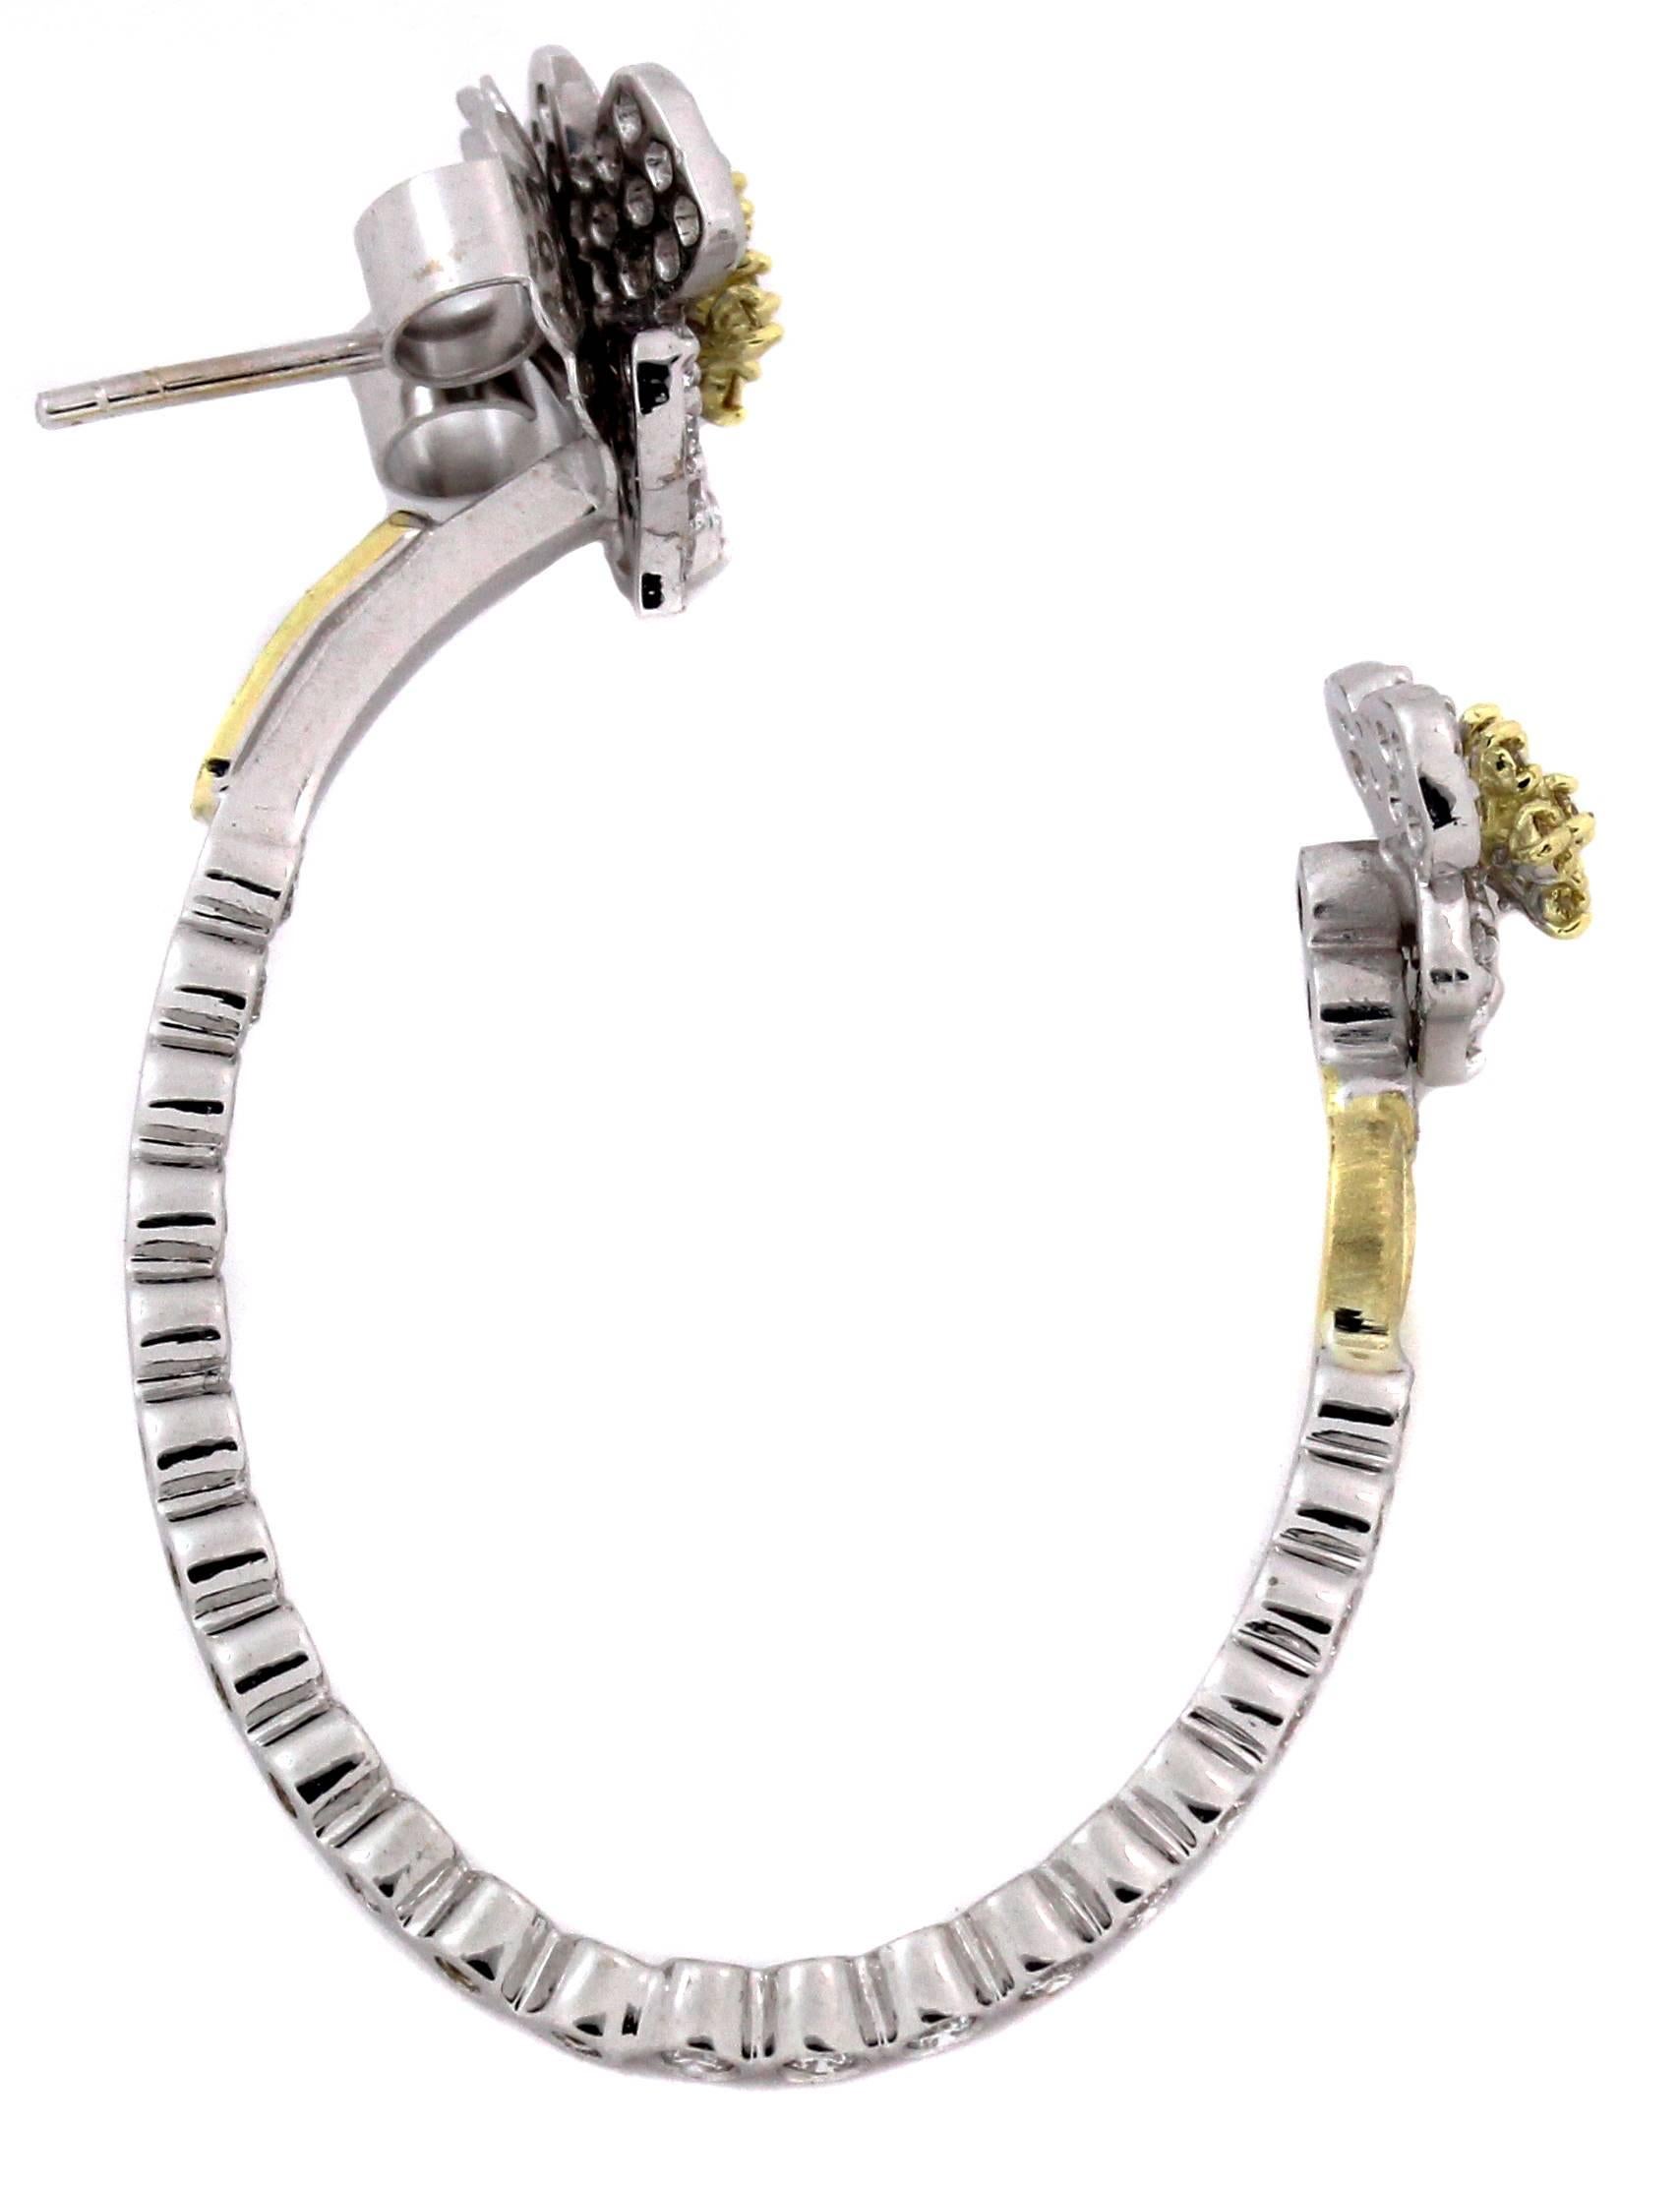 Stambolian 18K White and Yellow Diamonds Floral Two-Piece Hoop Earrings In New Condition For Sale In Boca Raton, FL